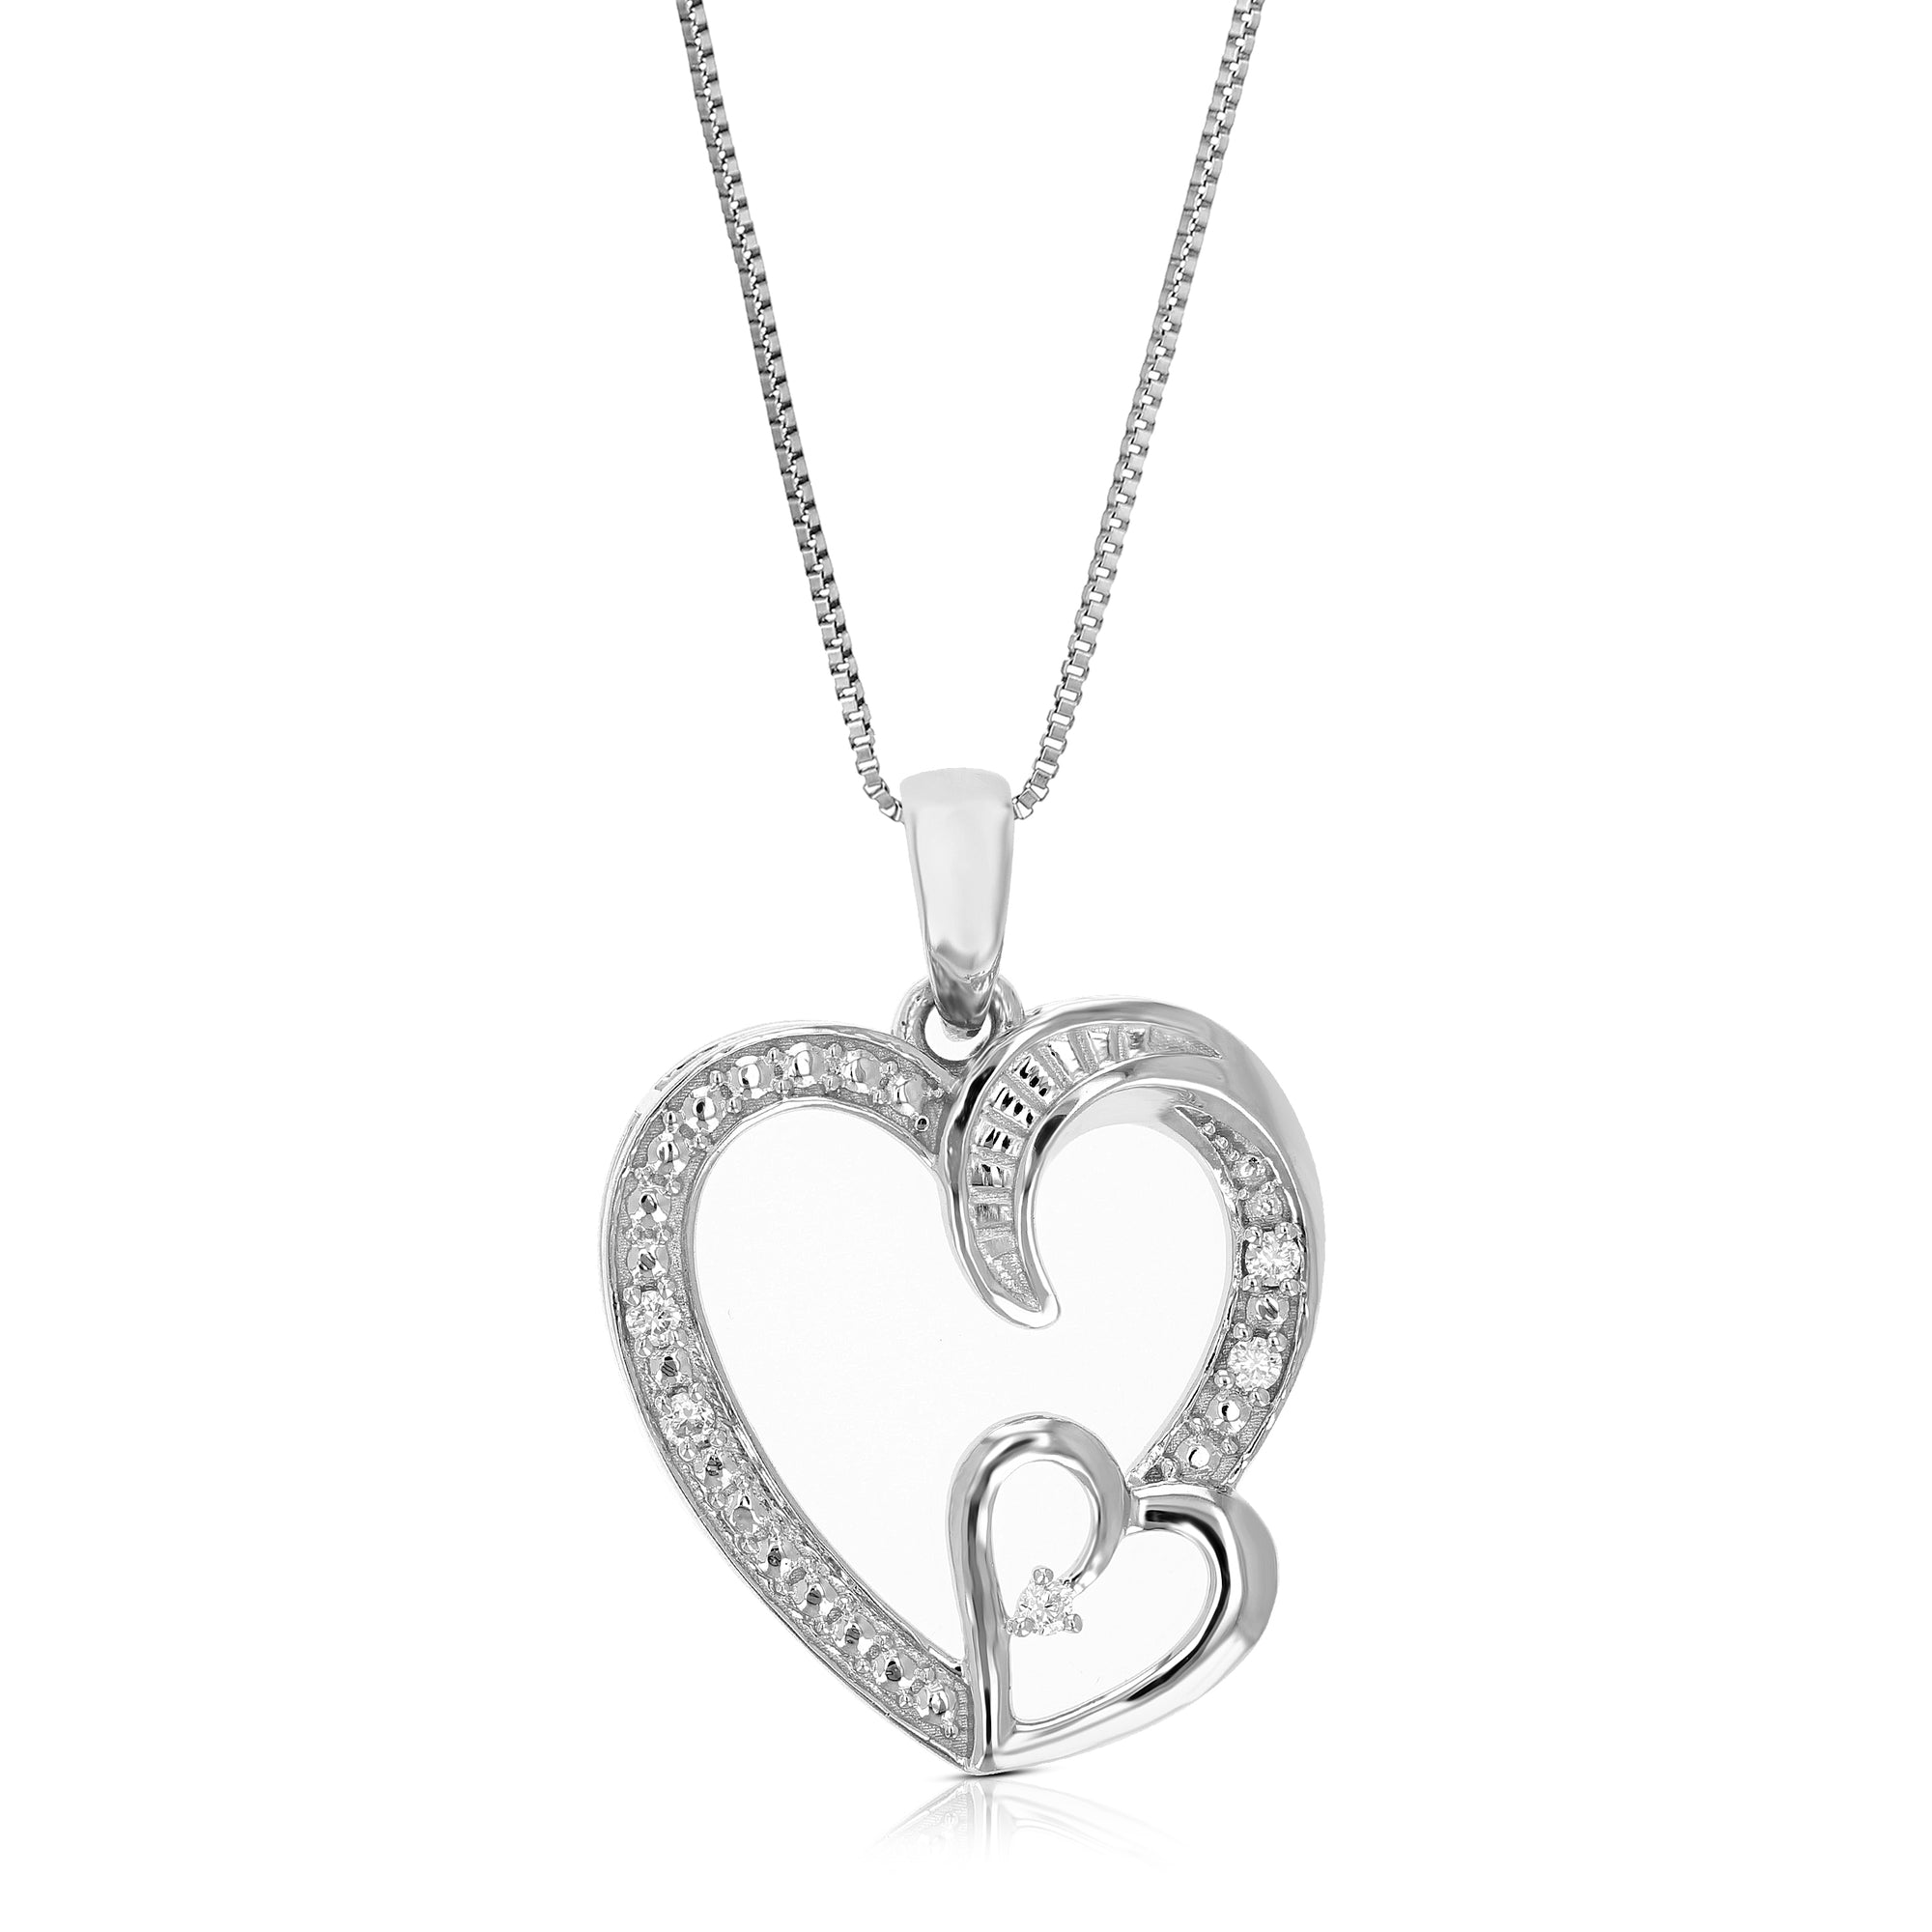 1/20 cttw Lab Grown Diamond Heart Pendant Necklace .925 Sterling Silver 2/3 Inch with 18 Inch Chain, Size 3/4 Inch